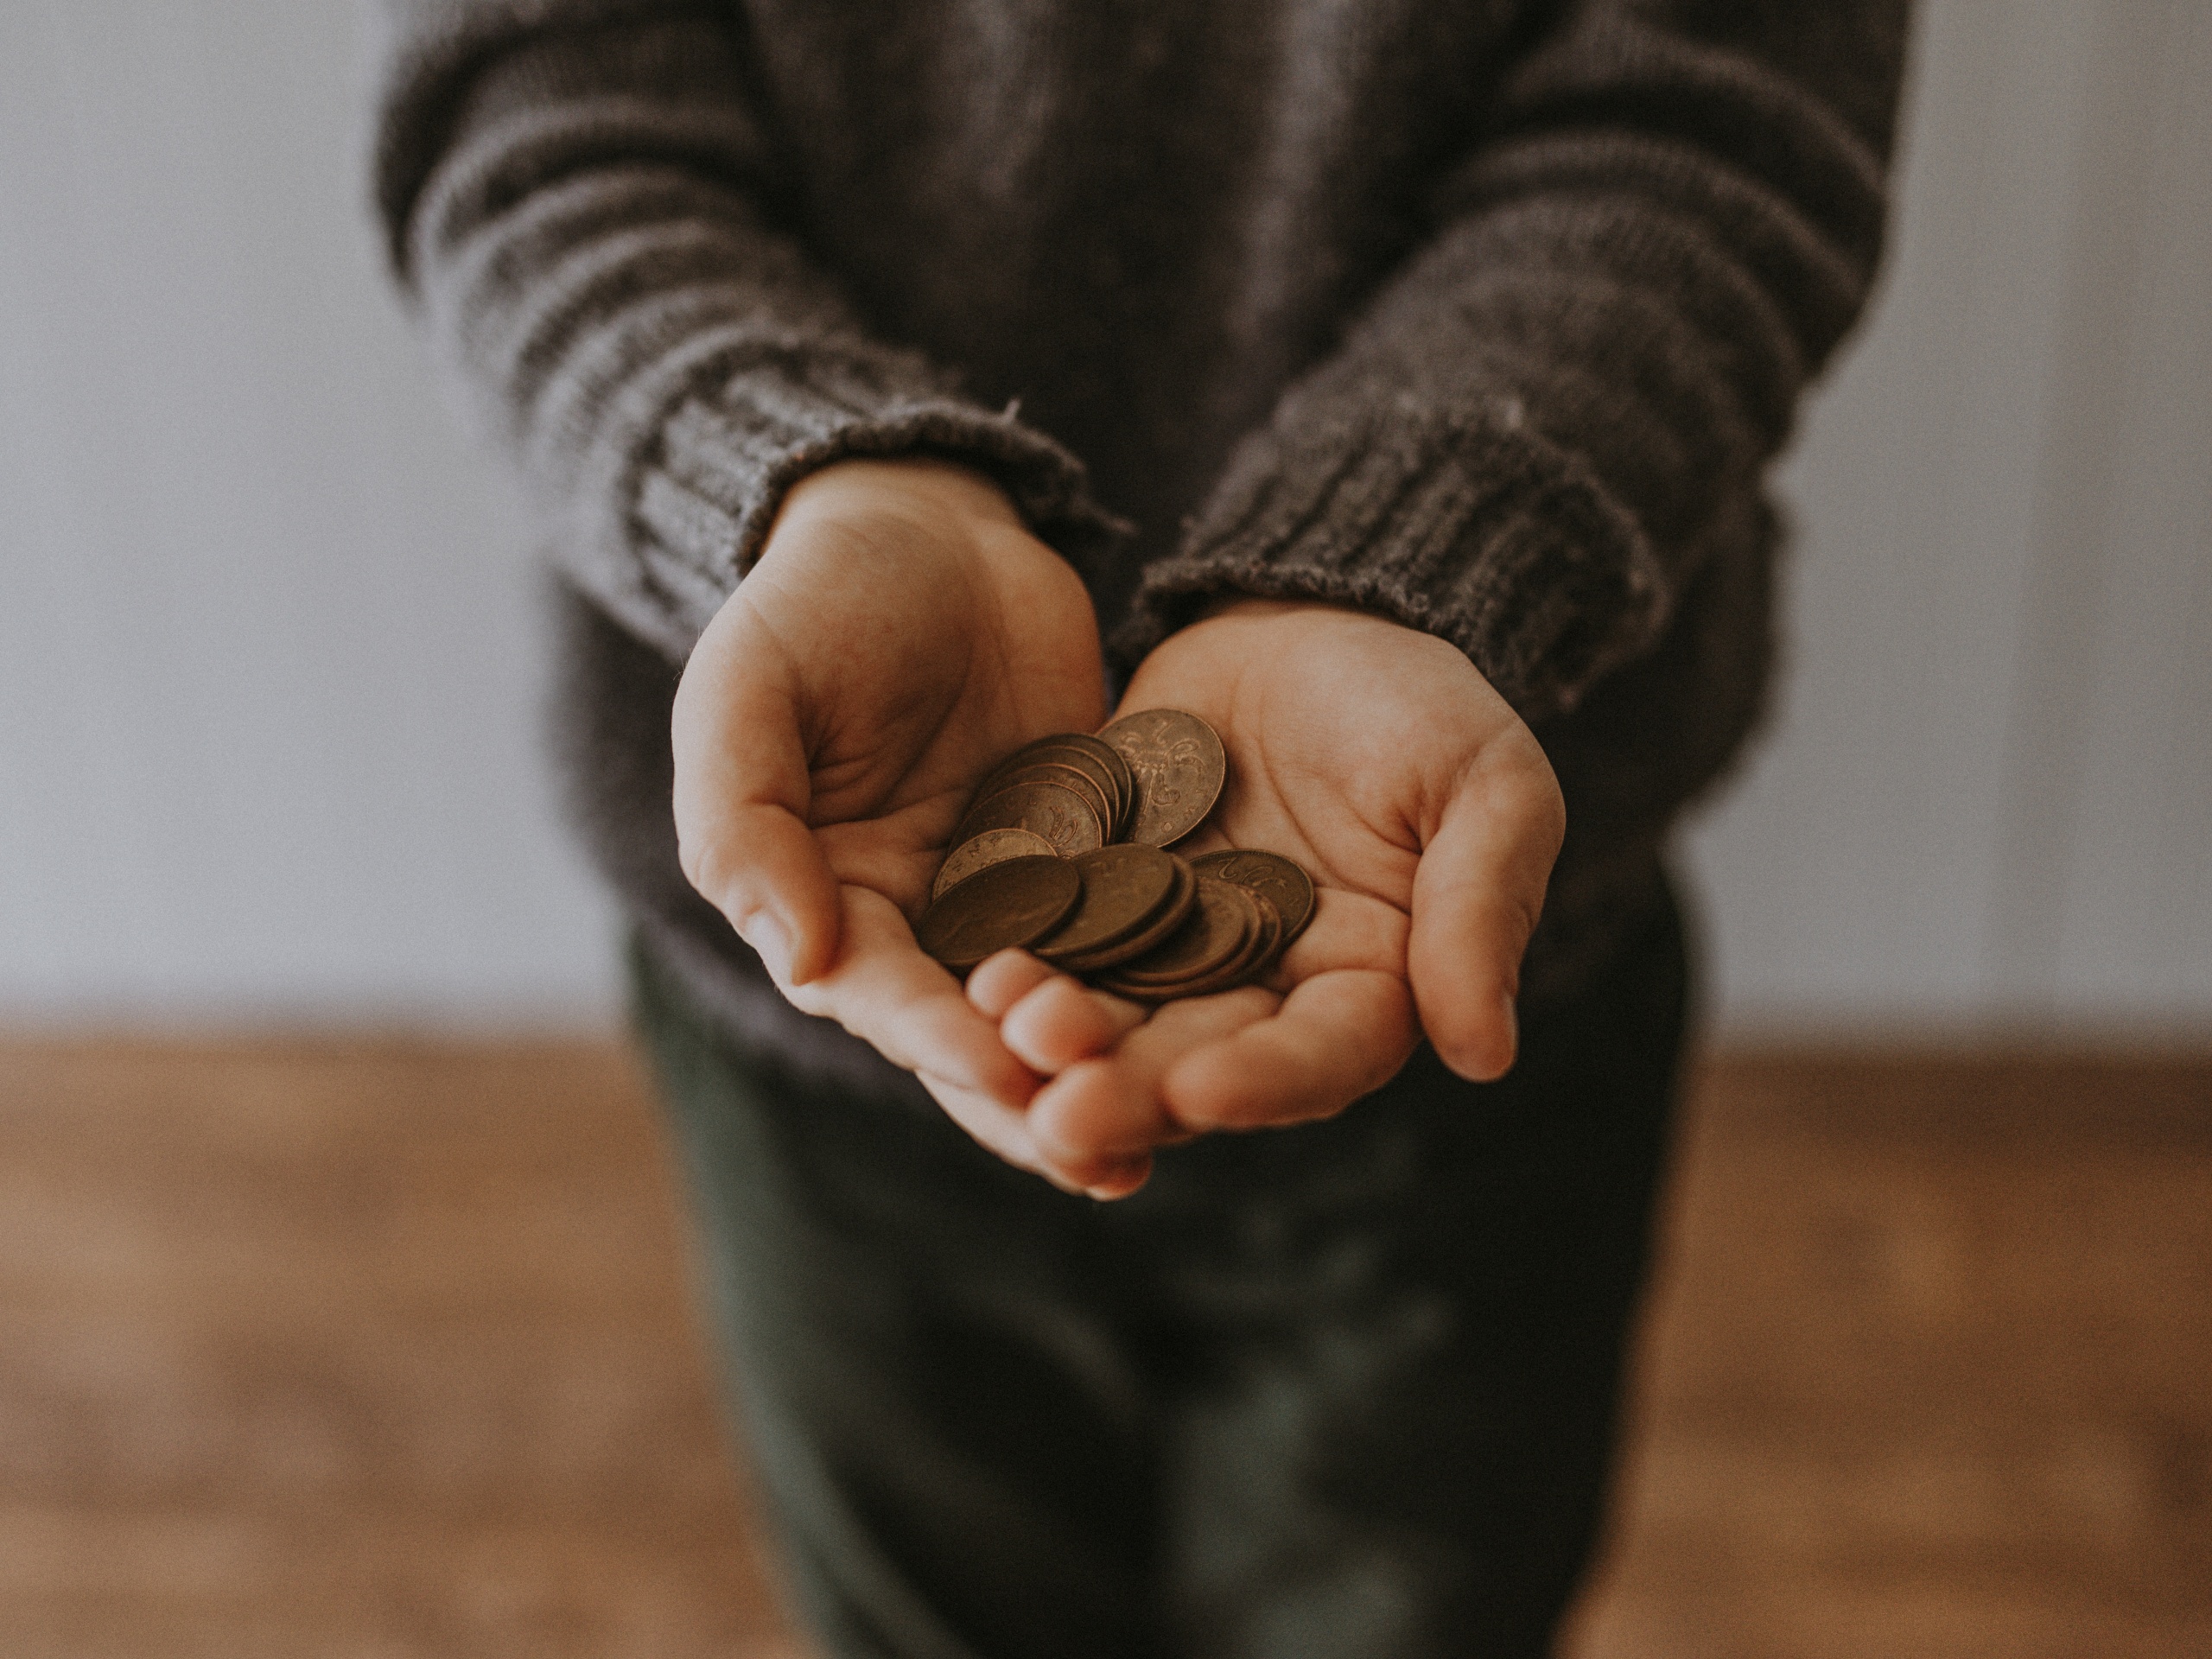 Time for the penny-pinching to stop and #RaiseTheRate. Photo by Annie Spratt on Unsplash